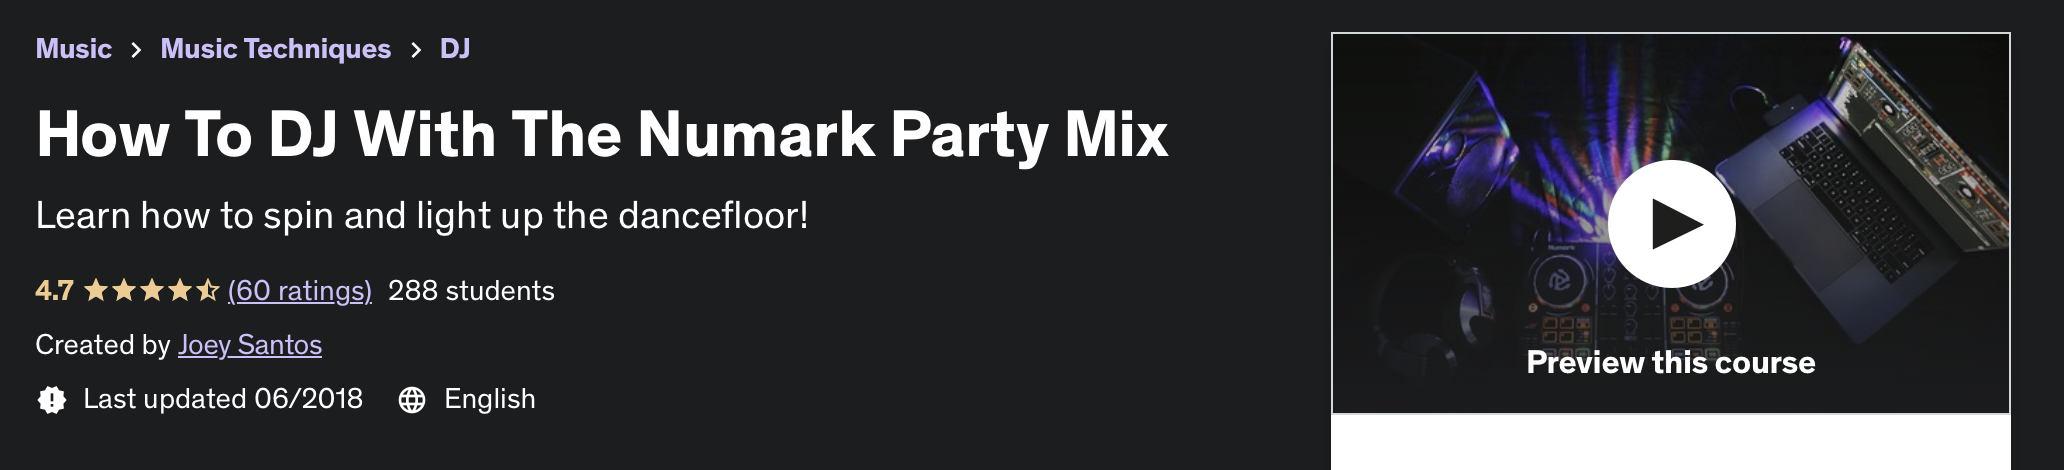 Learn To DJ With The Numark Party Mix